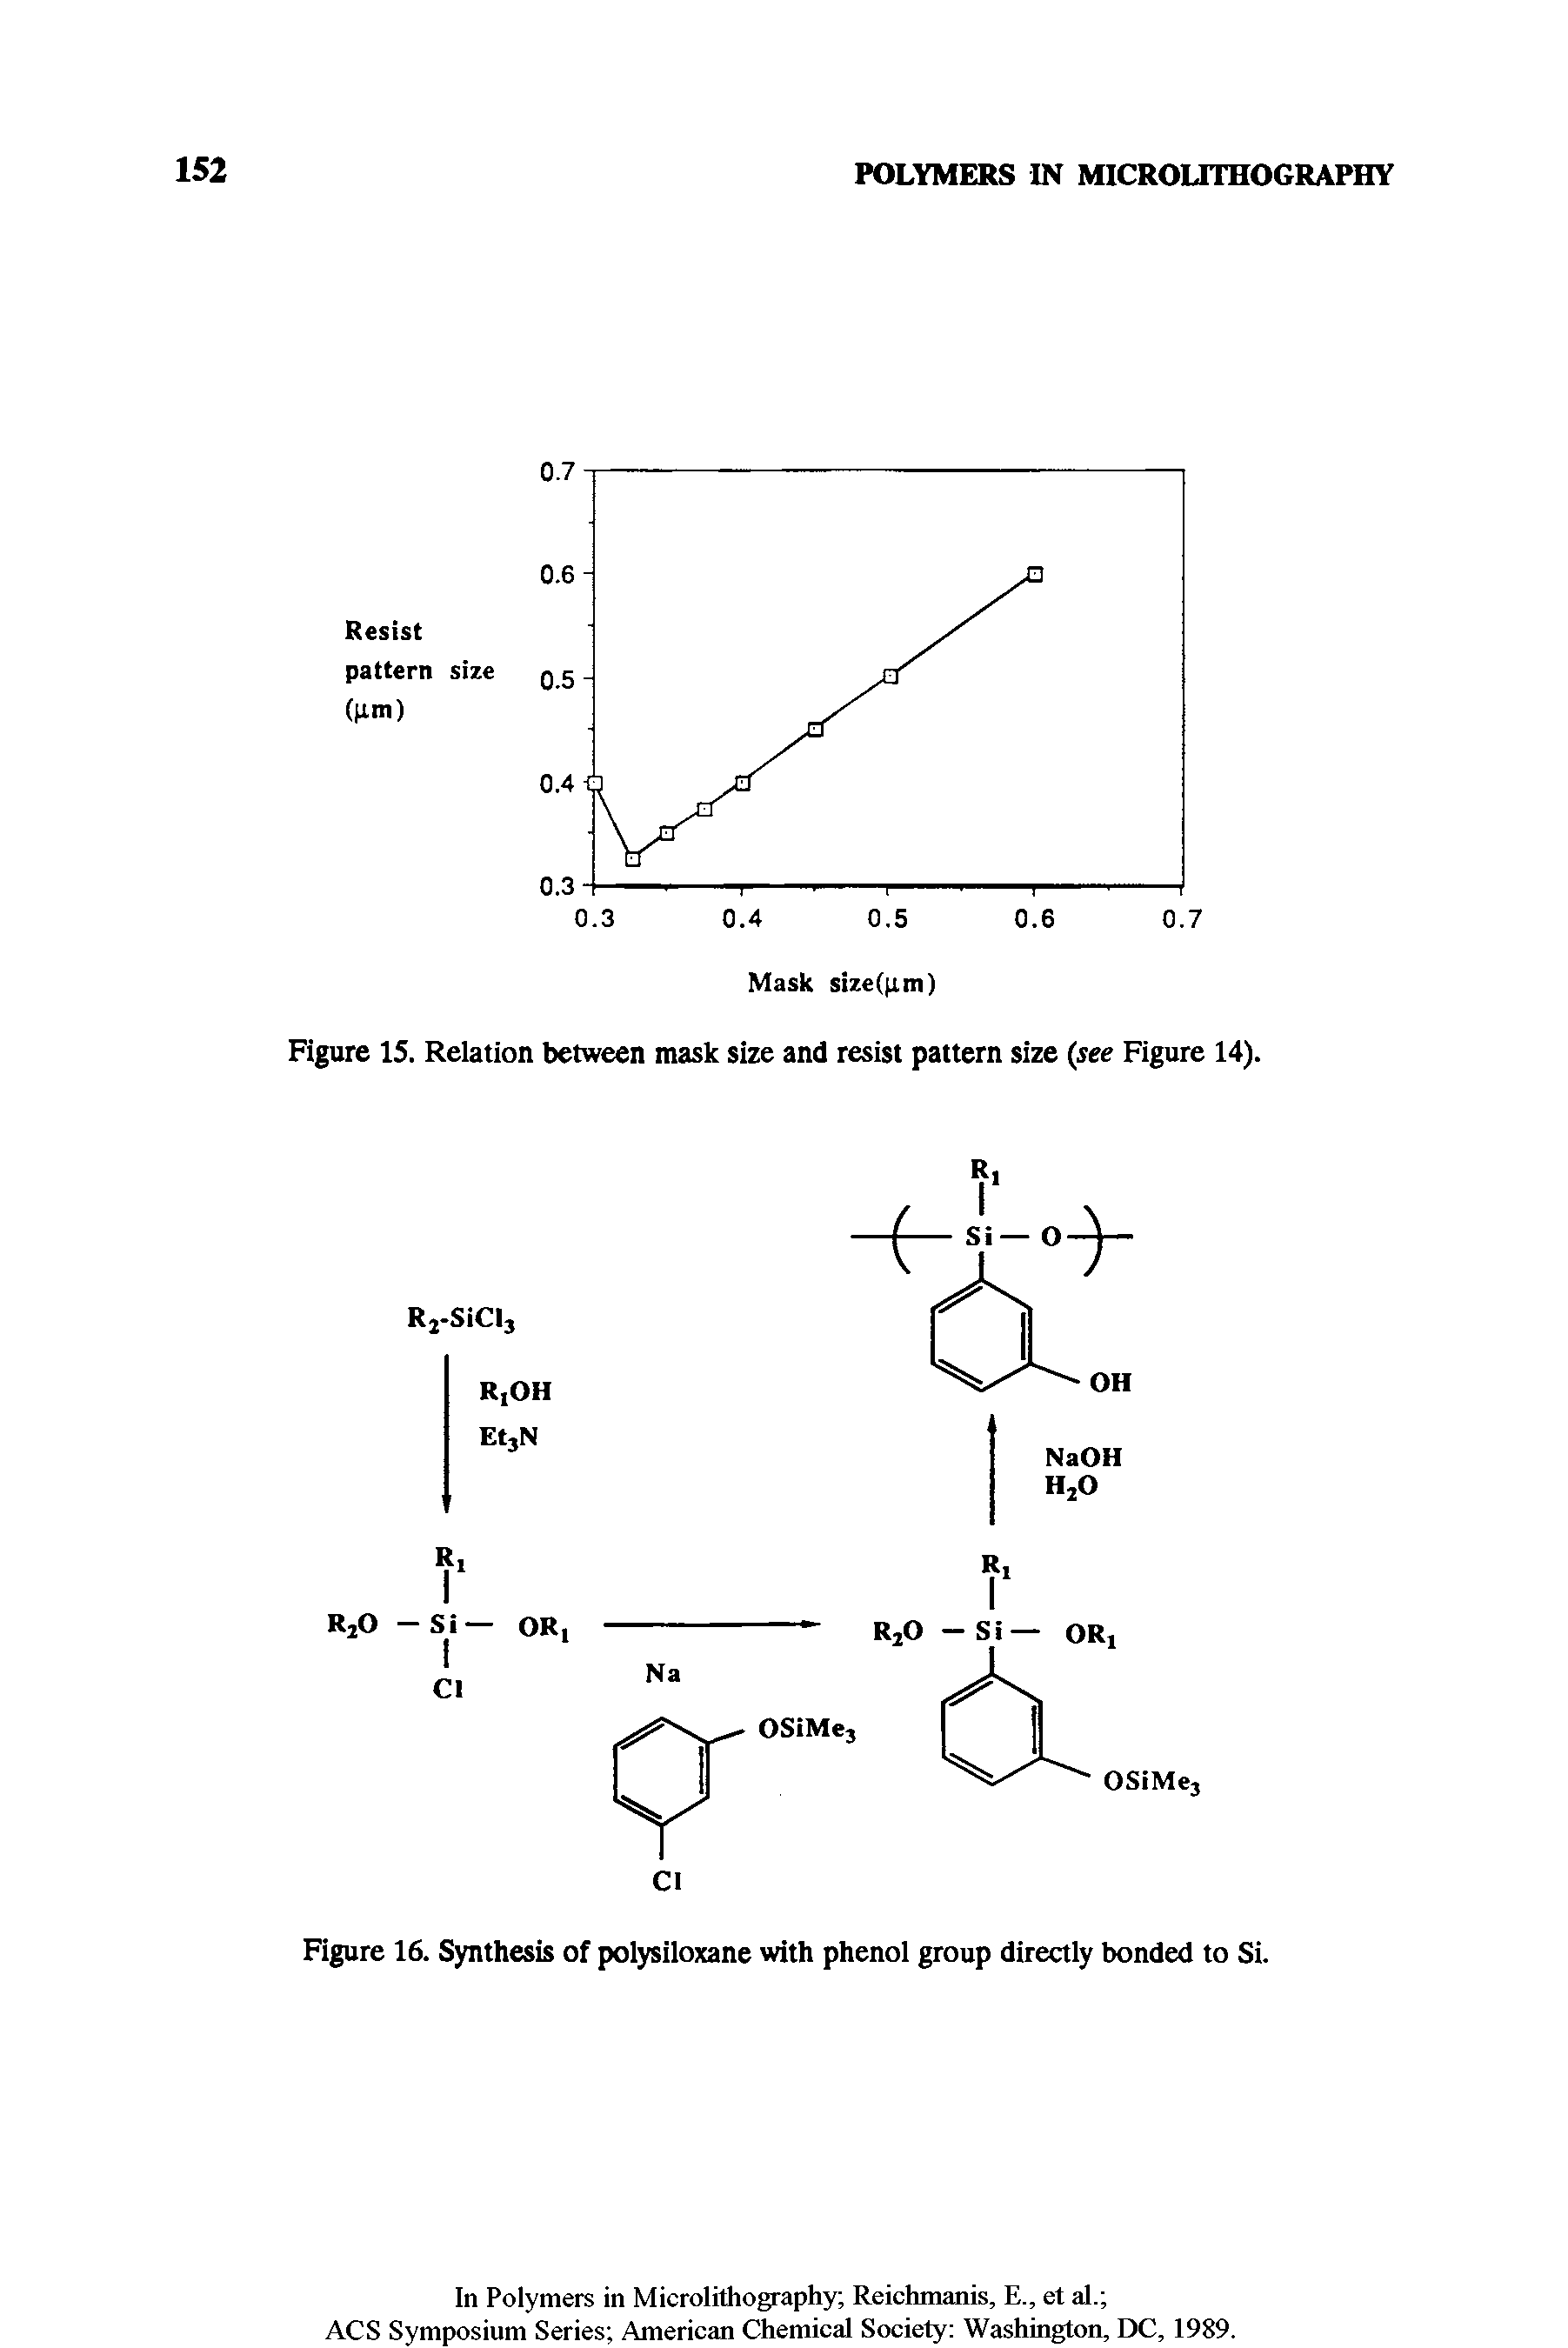 Figure 16. Synthesis of polysiloxane with phenol group directly bonded to Si.